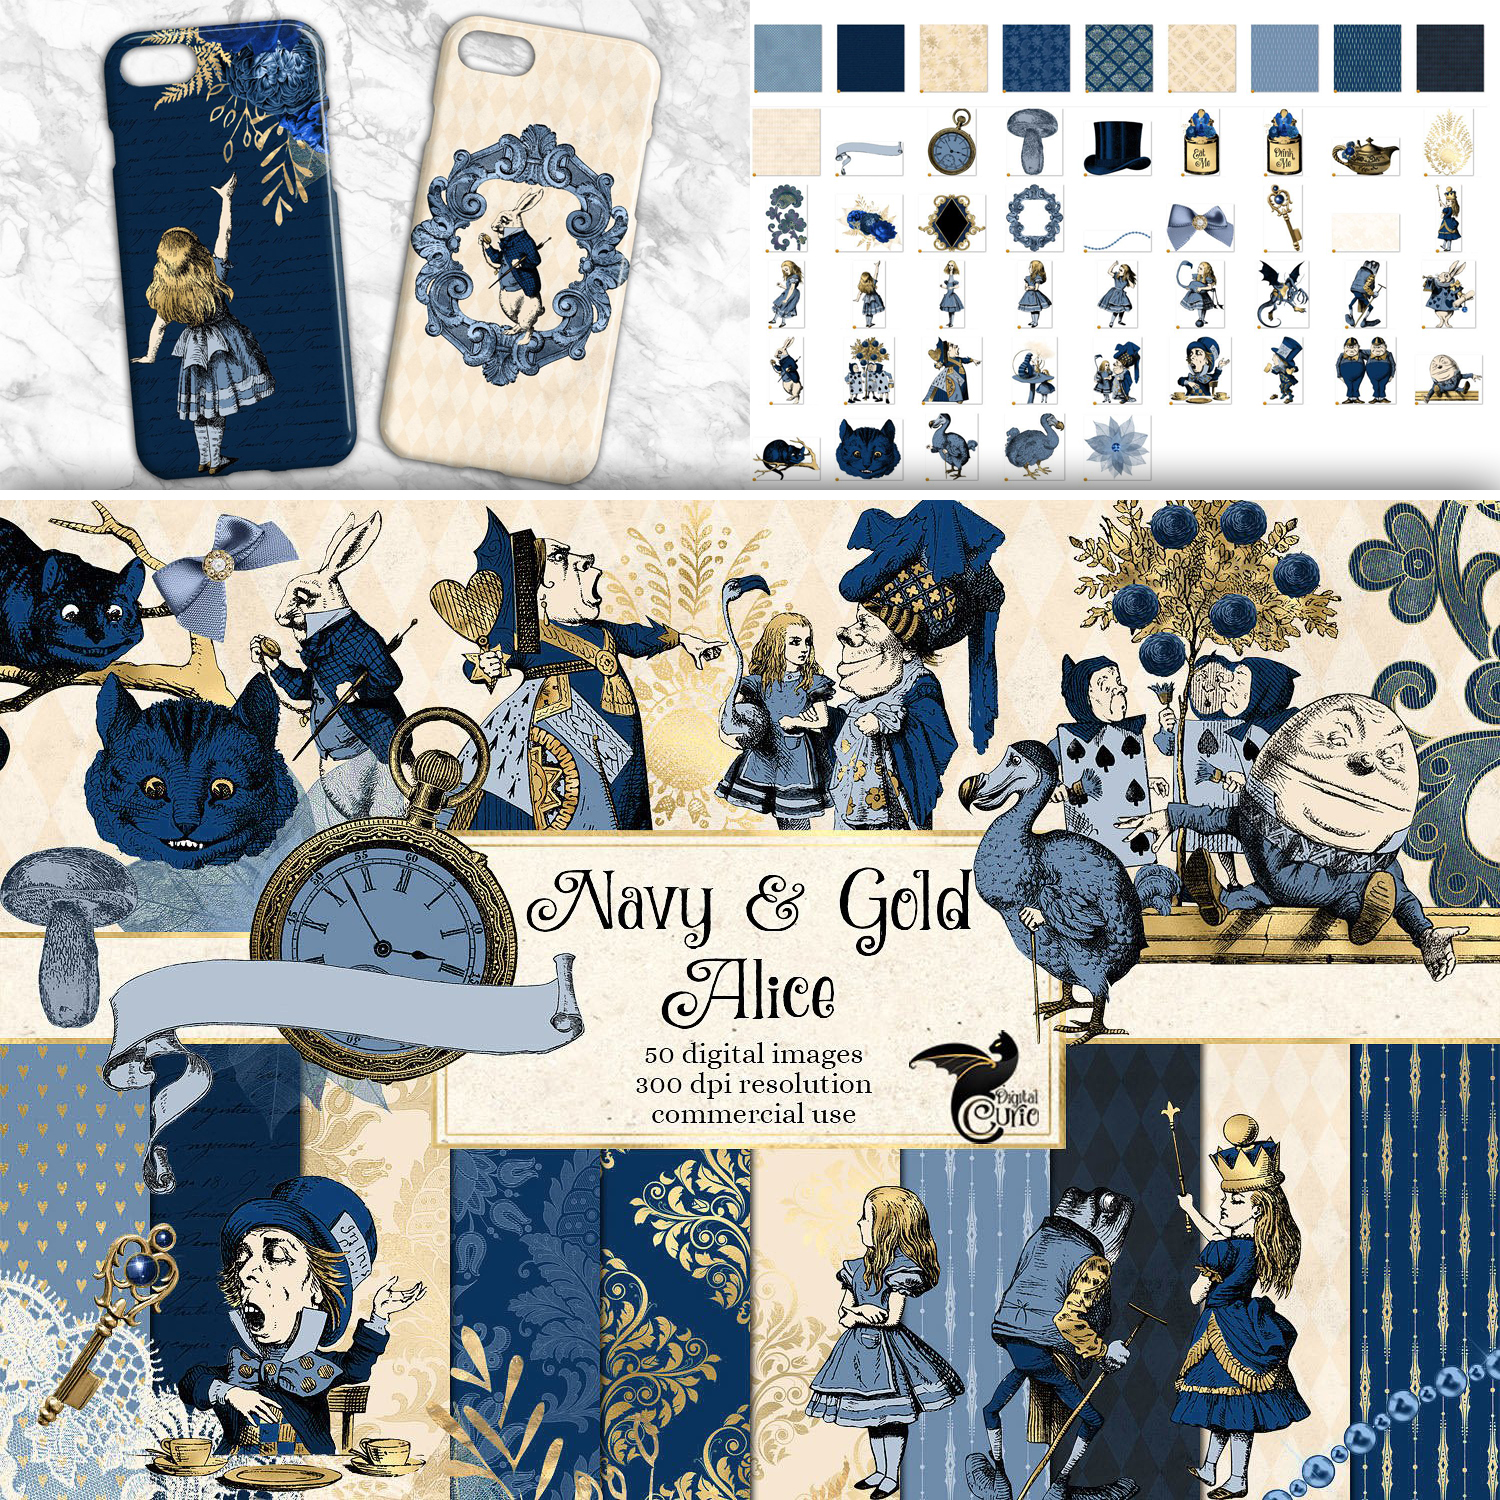 Preview navy blue and gold alice in wonderland graphics.